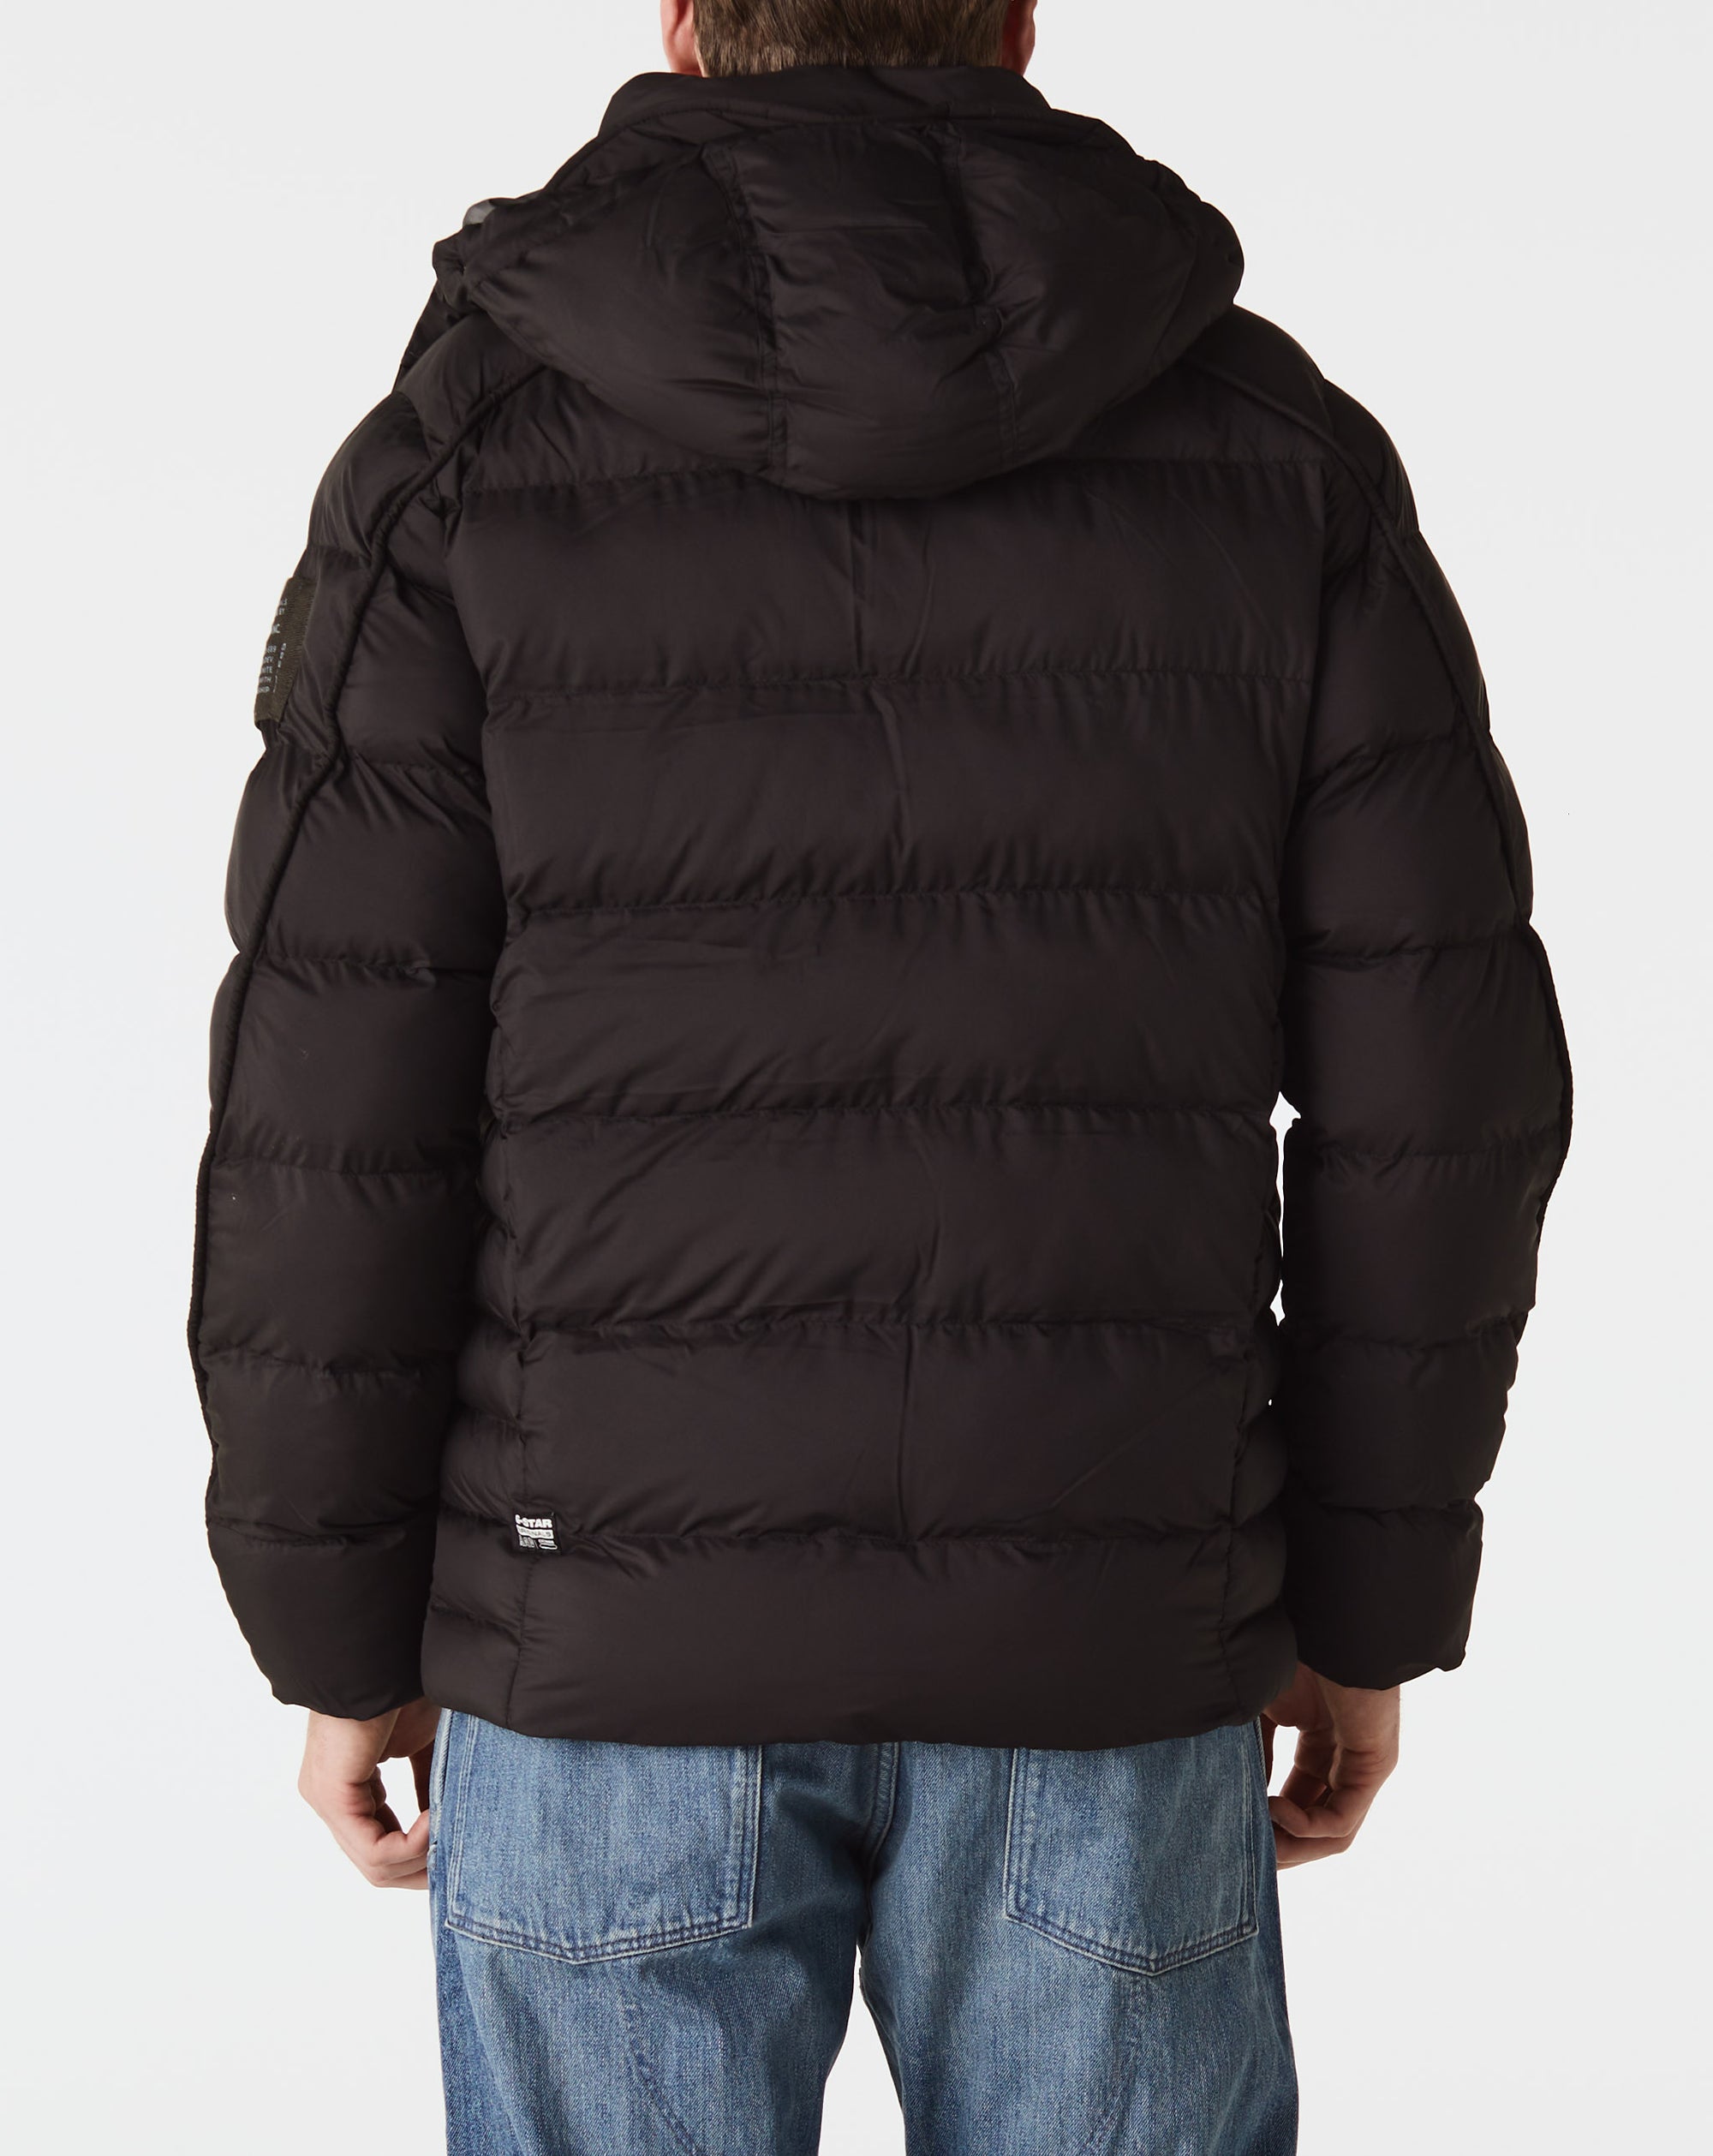 G-Star RAW G-Whistler Hooded Puffer - Rule of Next Apparel